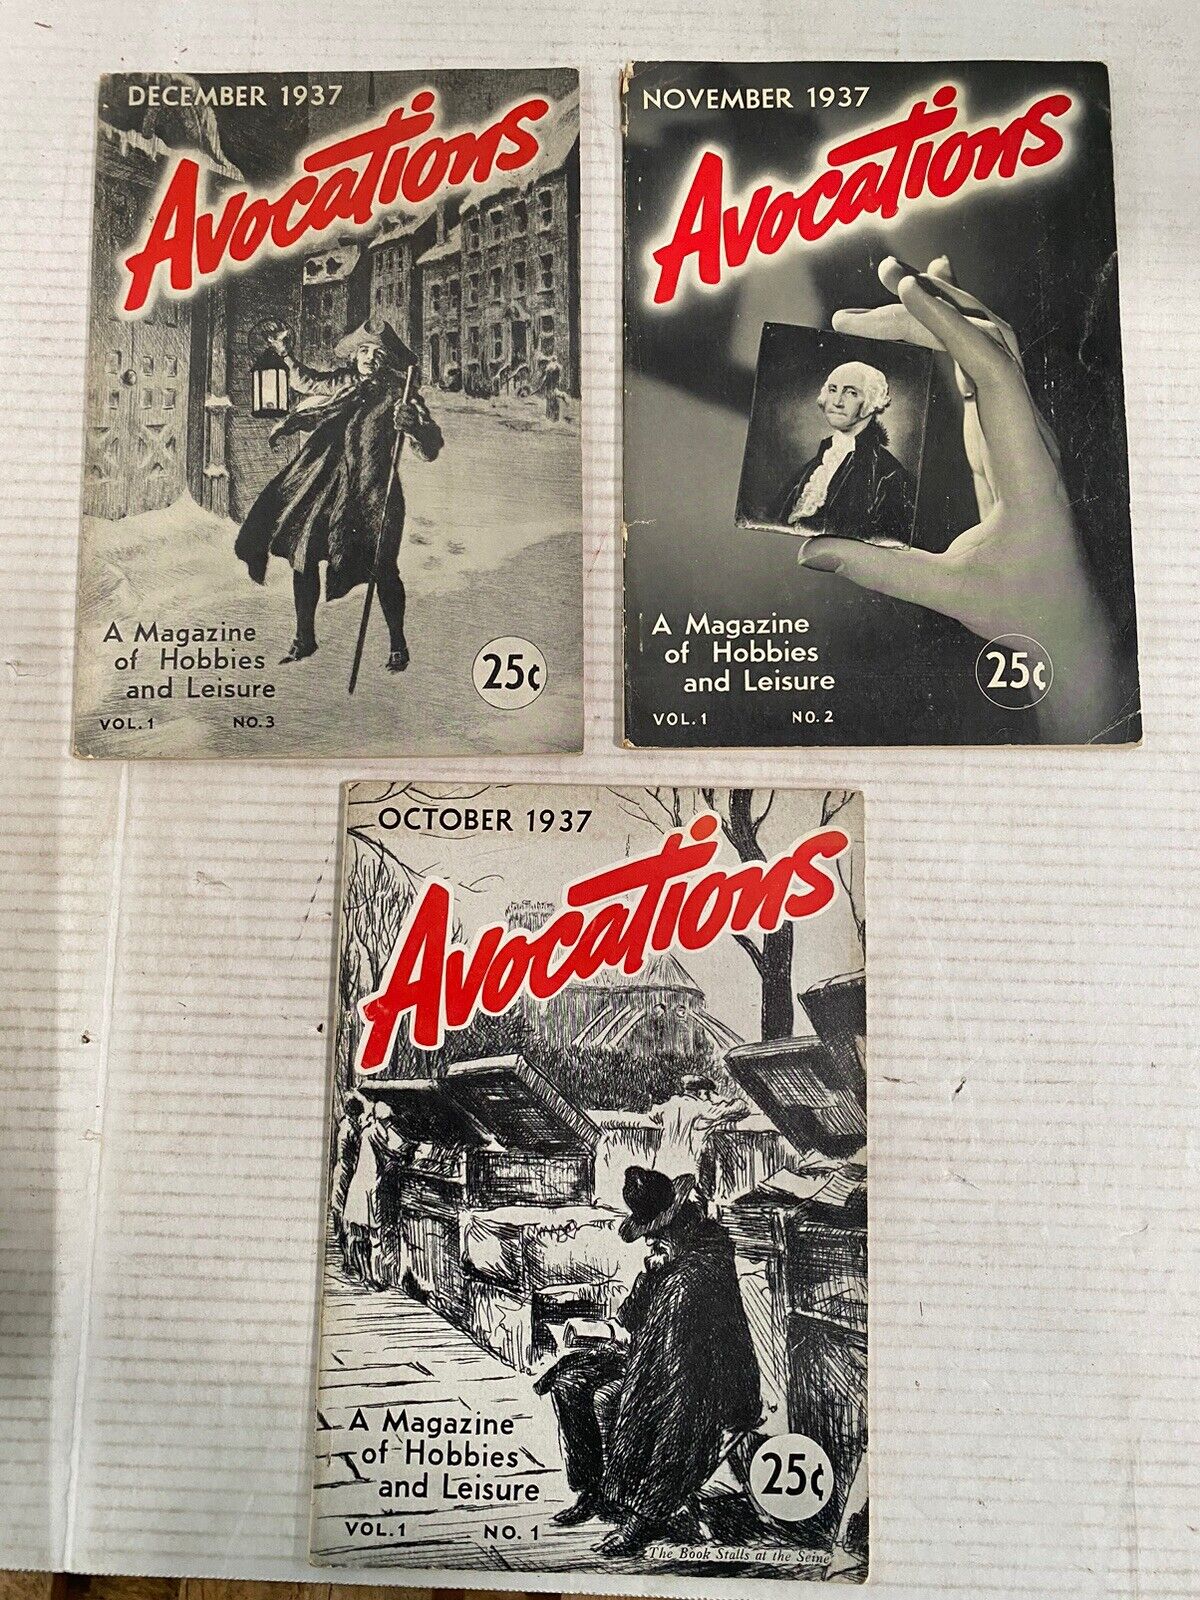 Avocations Magazine of Hobbies Leisure Lot of 3 1st Ed Oct 1937